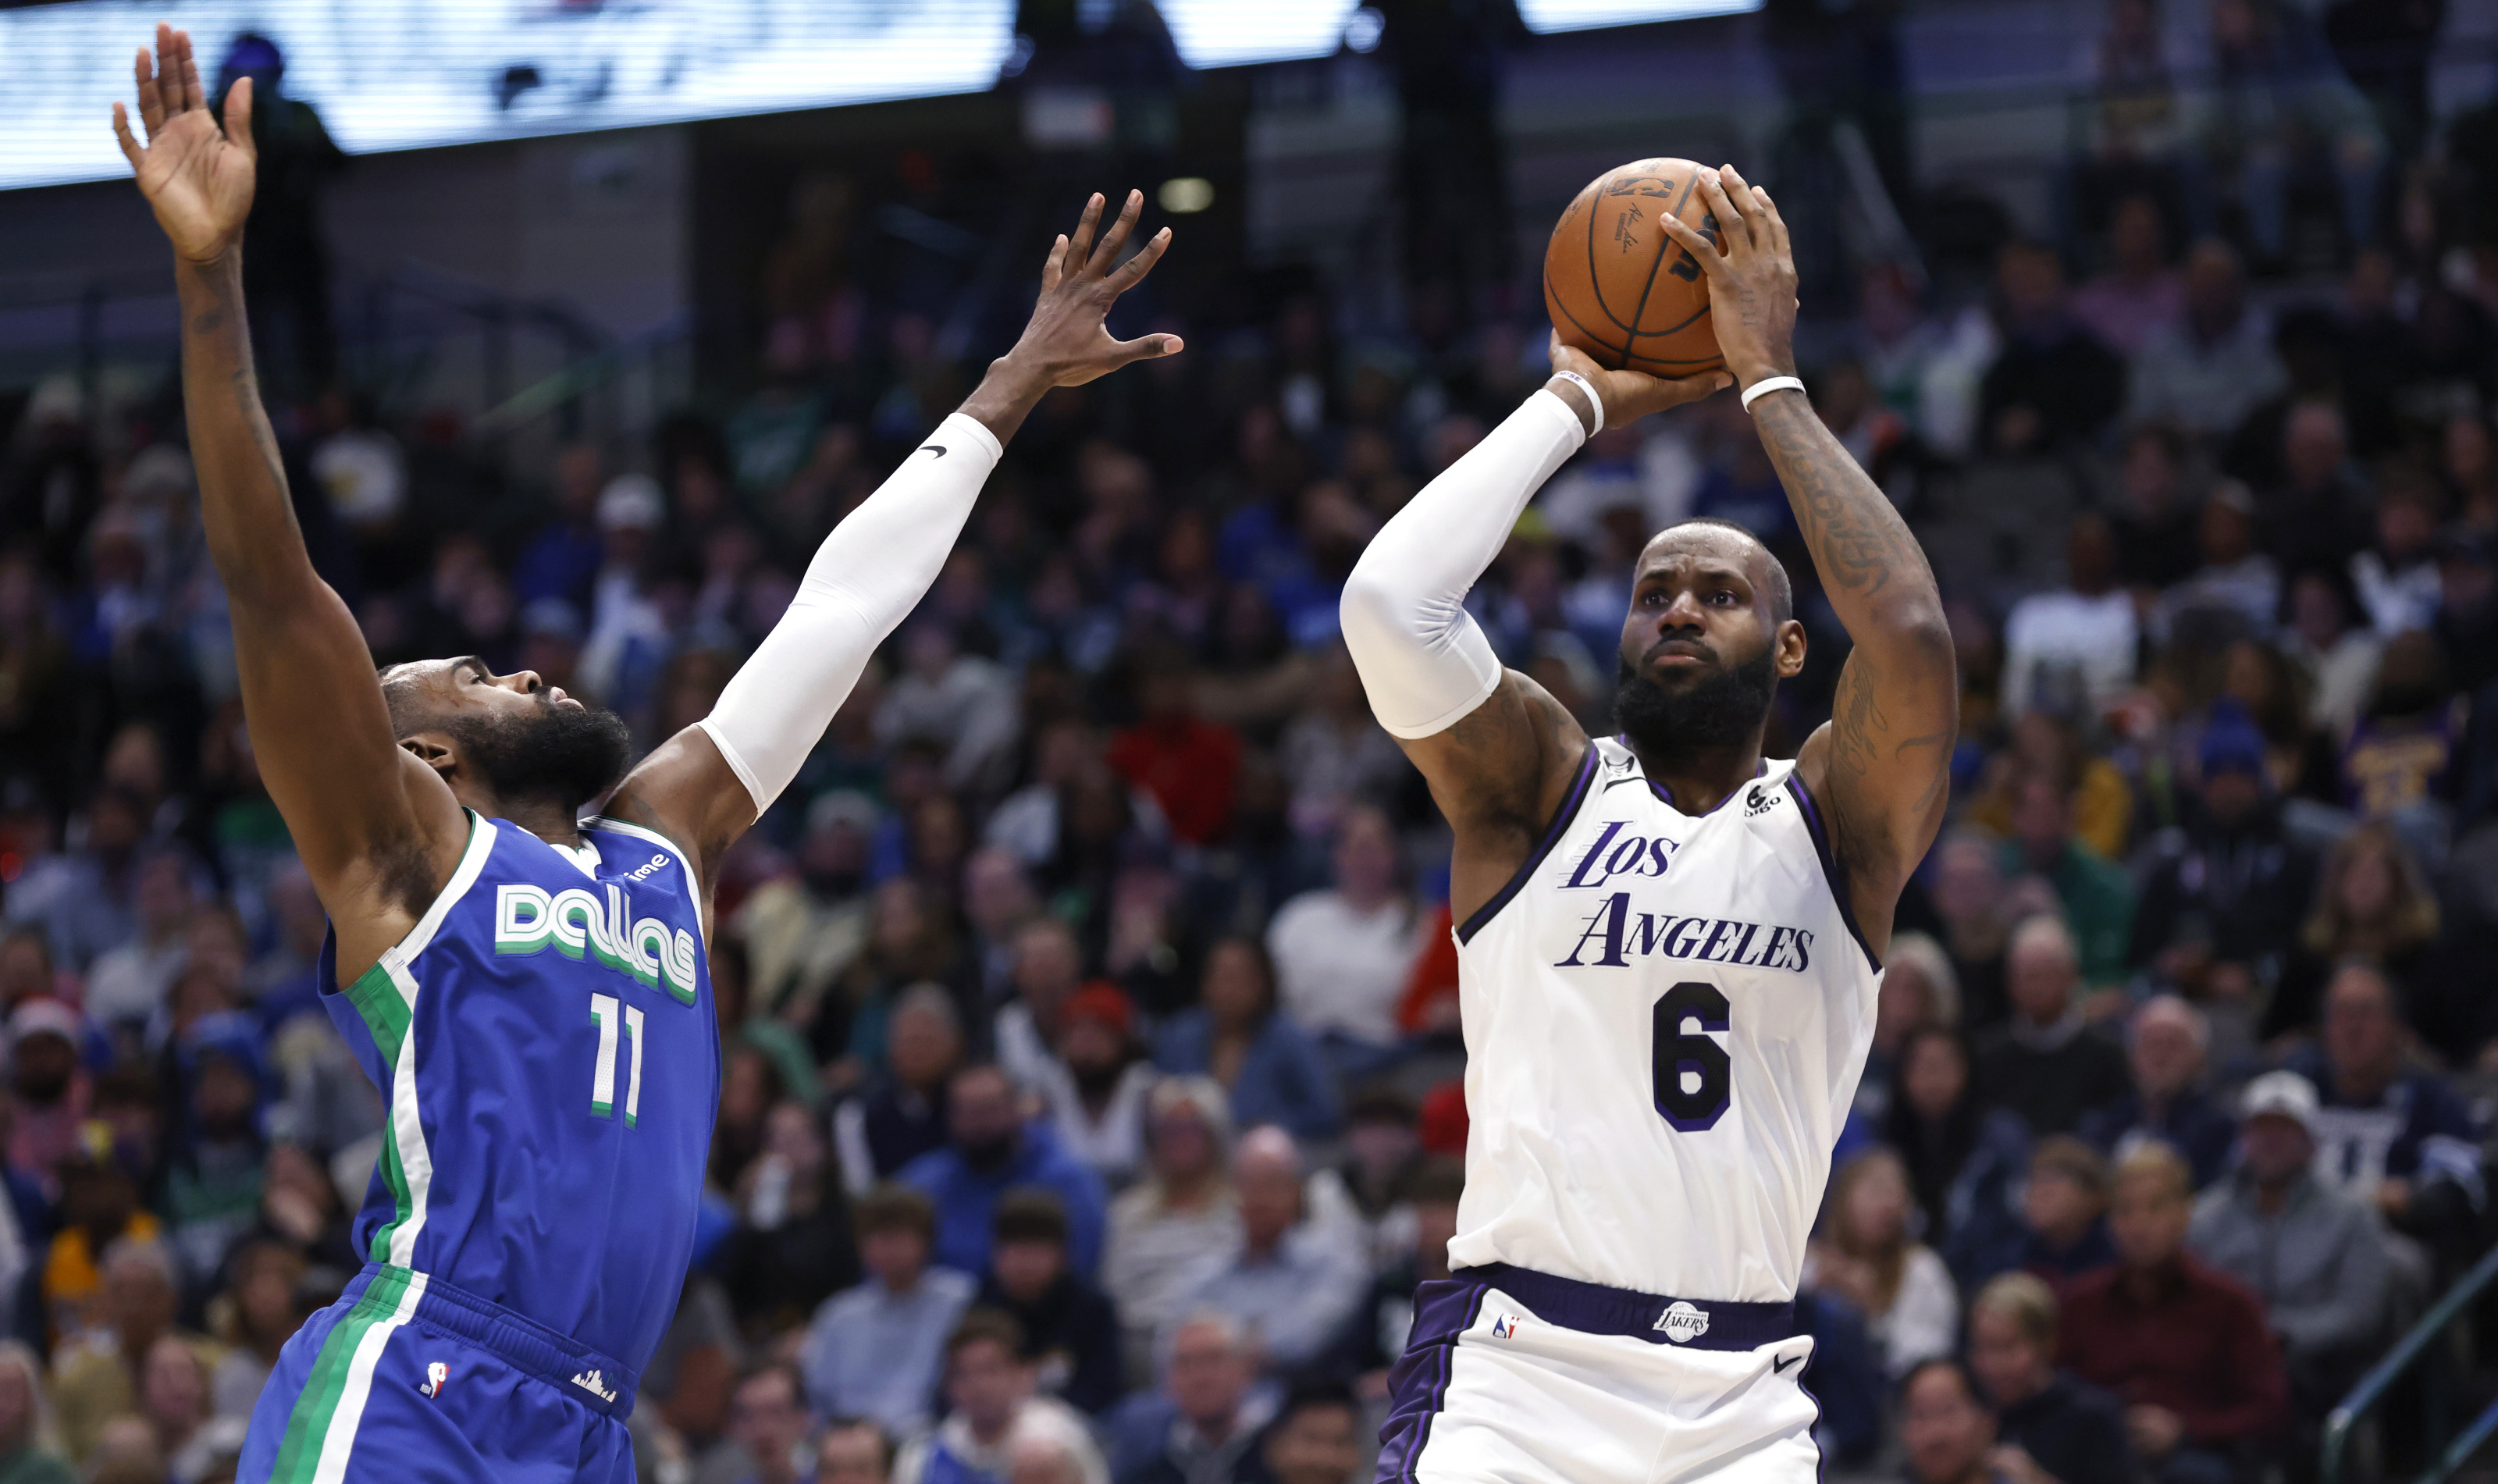 Sixers vs Lakers takeaways: Winning another close game; LeBron James'  historic performance